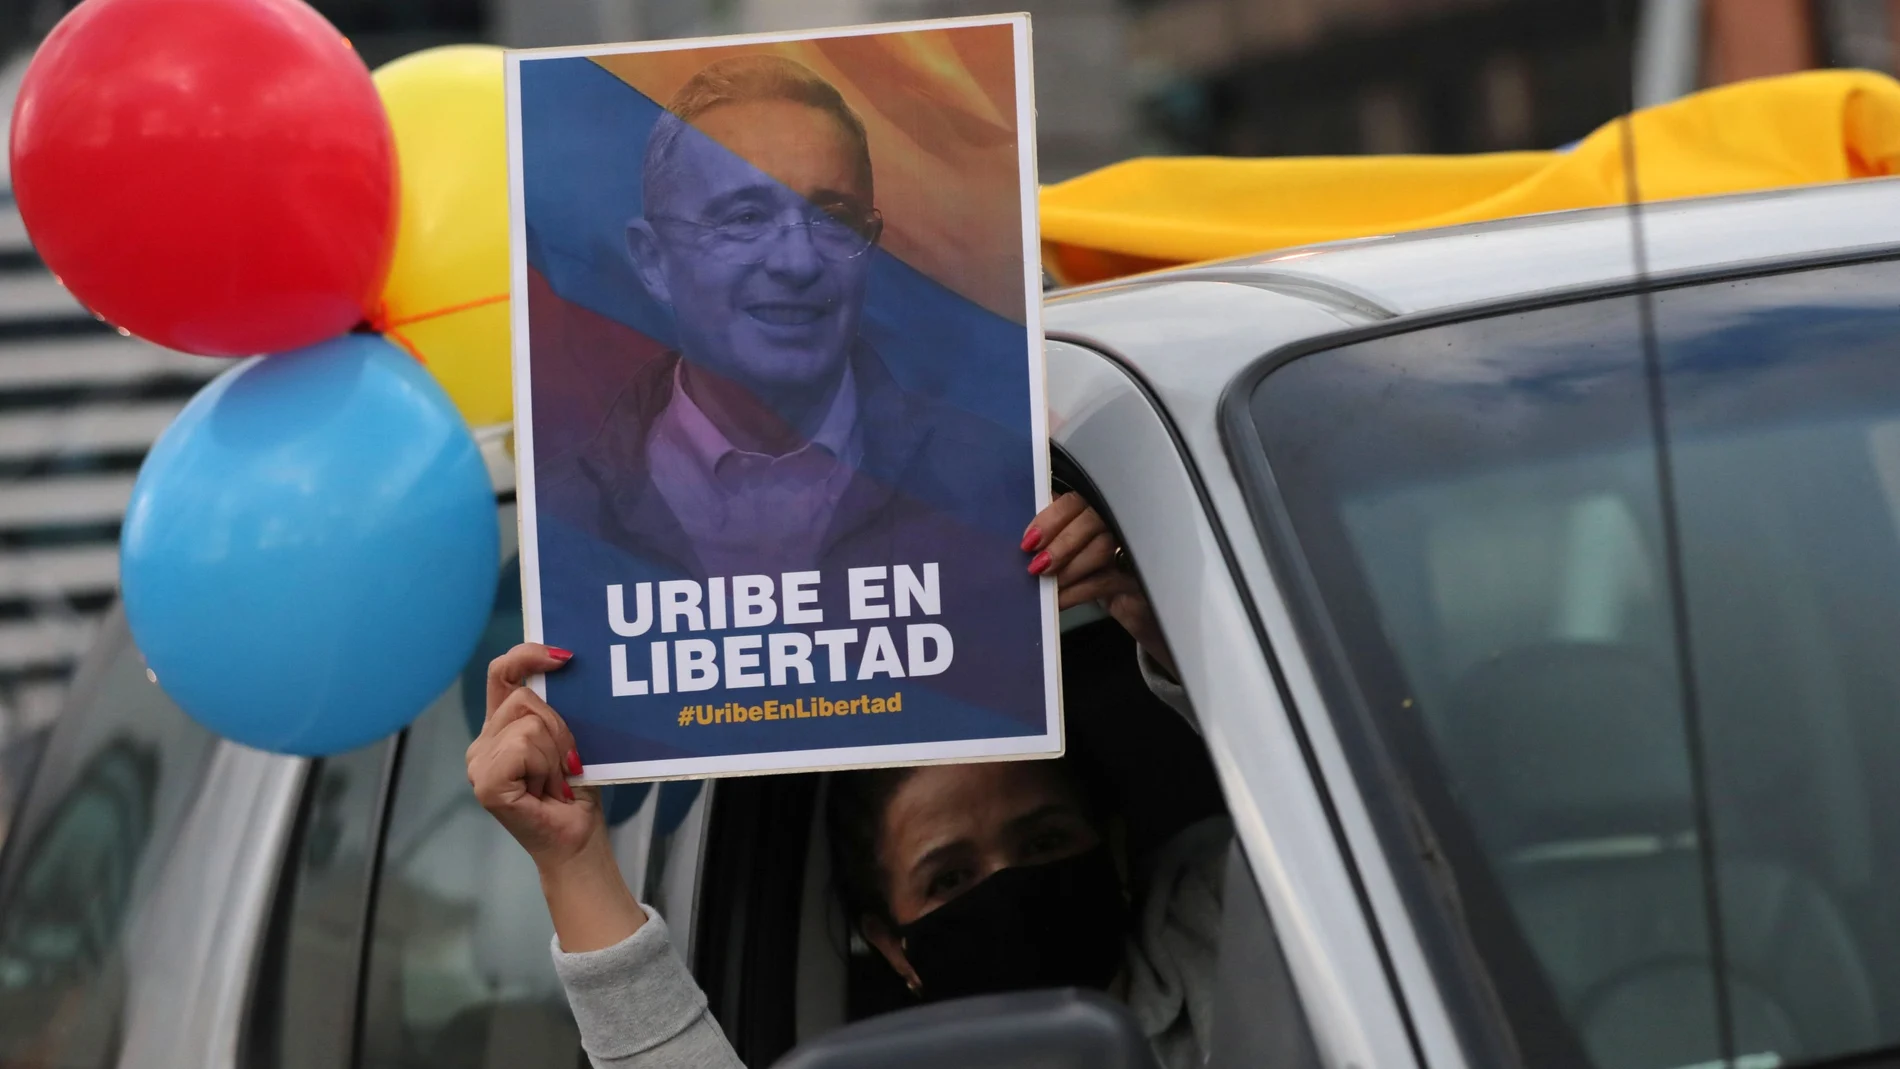 Colombia Supreme Court places former President Uribe under house arrest